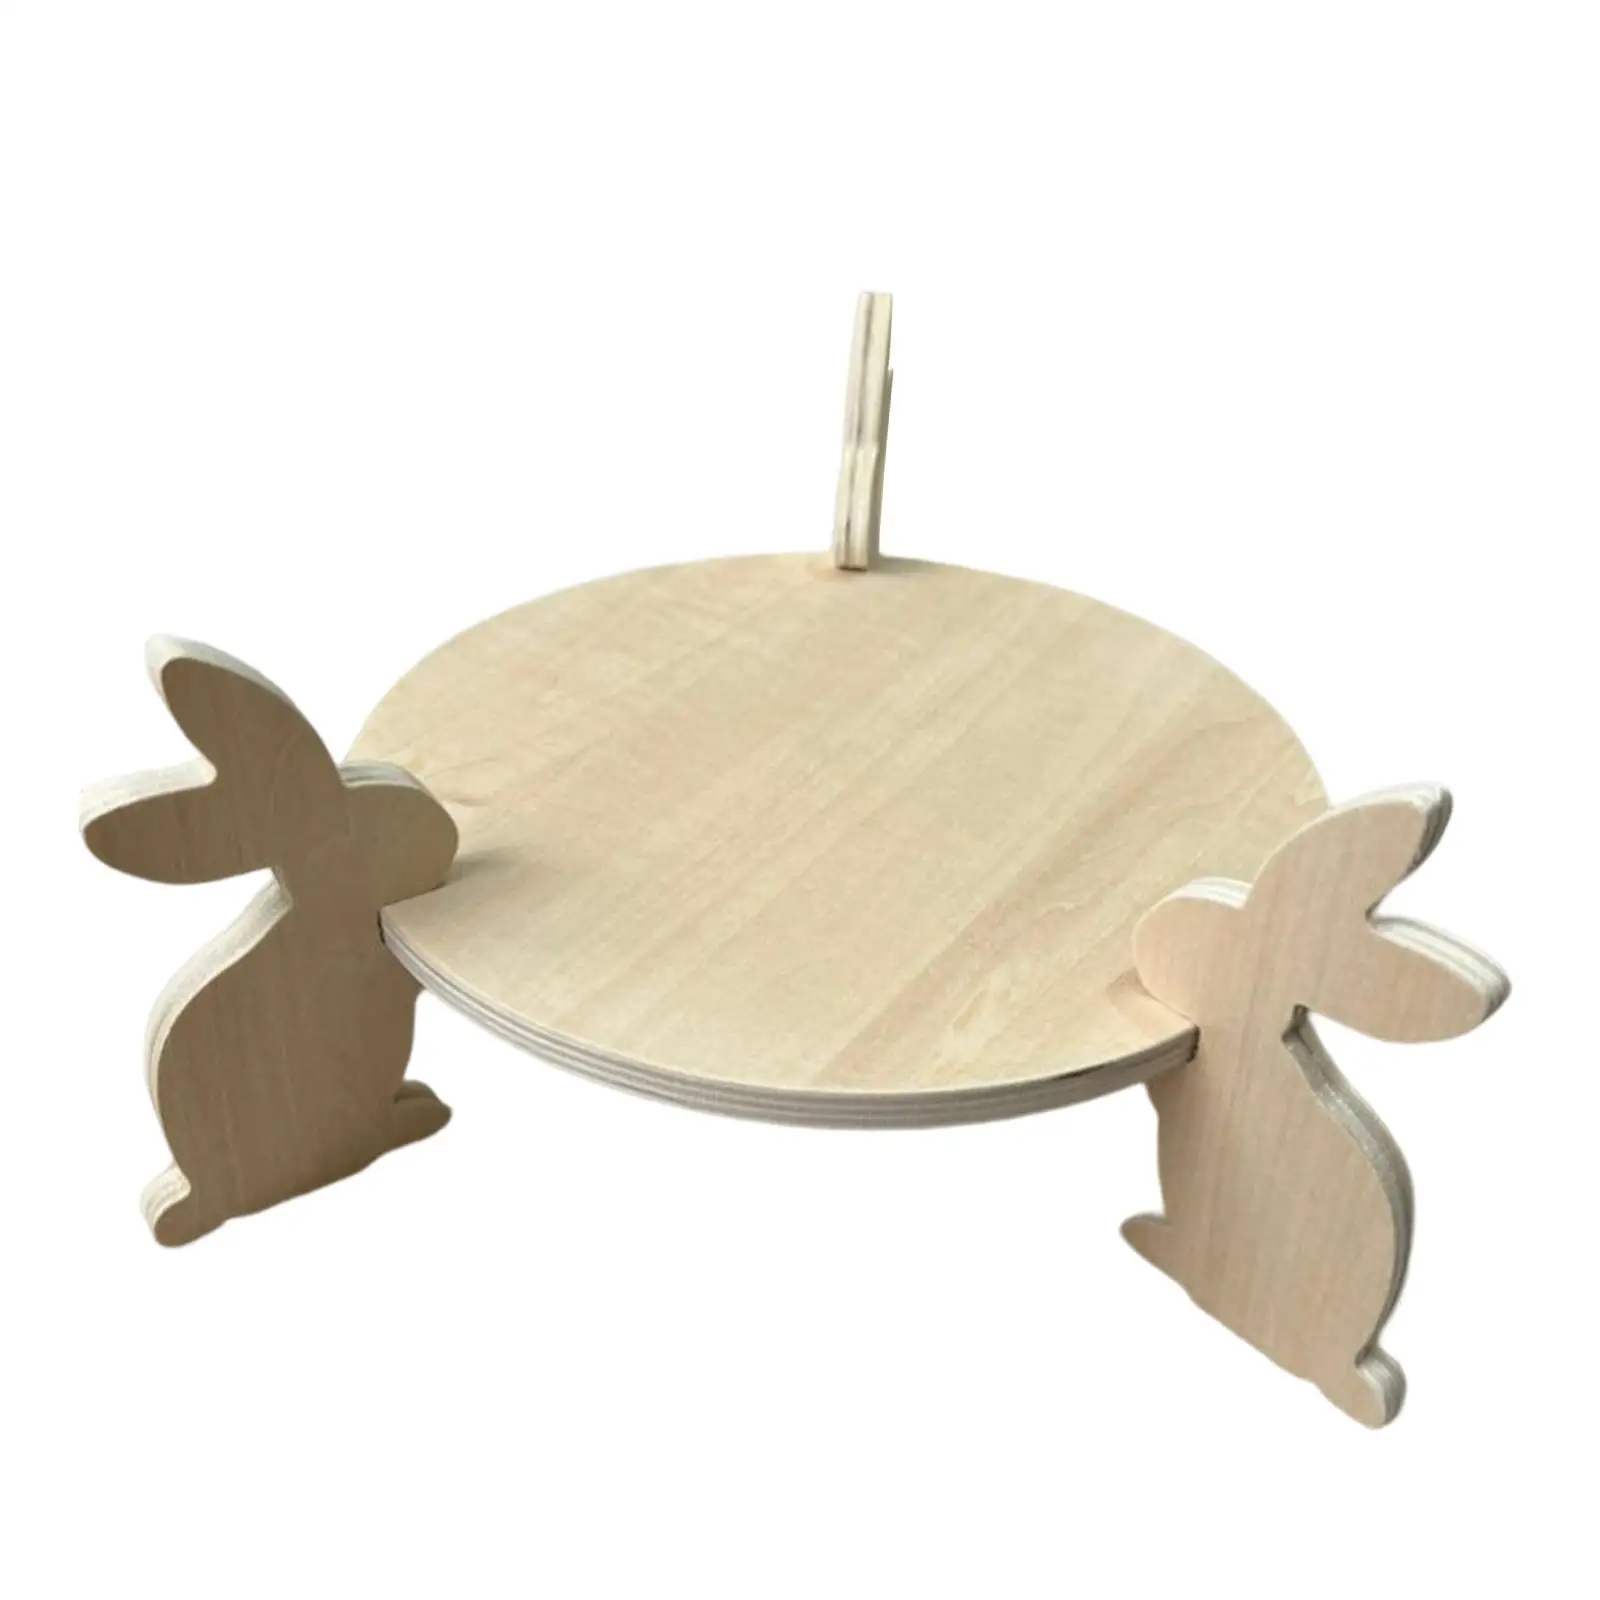 9.8in Cake Holder Serving Tray Dessert Plates Tableware Crafts Display Wood Cake Stand for Holiday Birthday Home Party Snacks